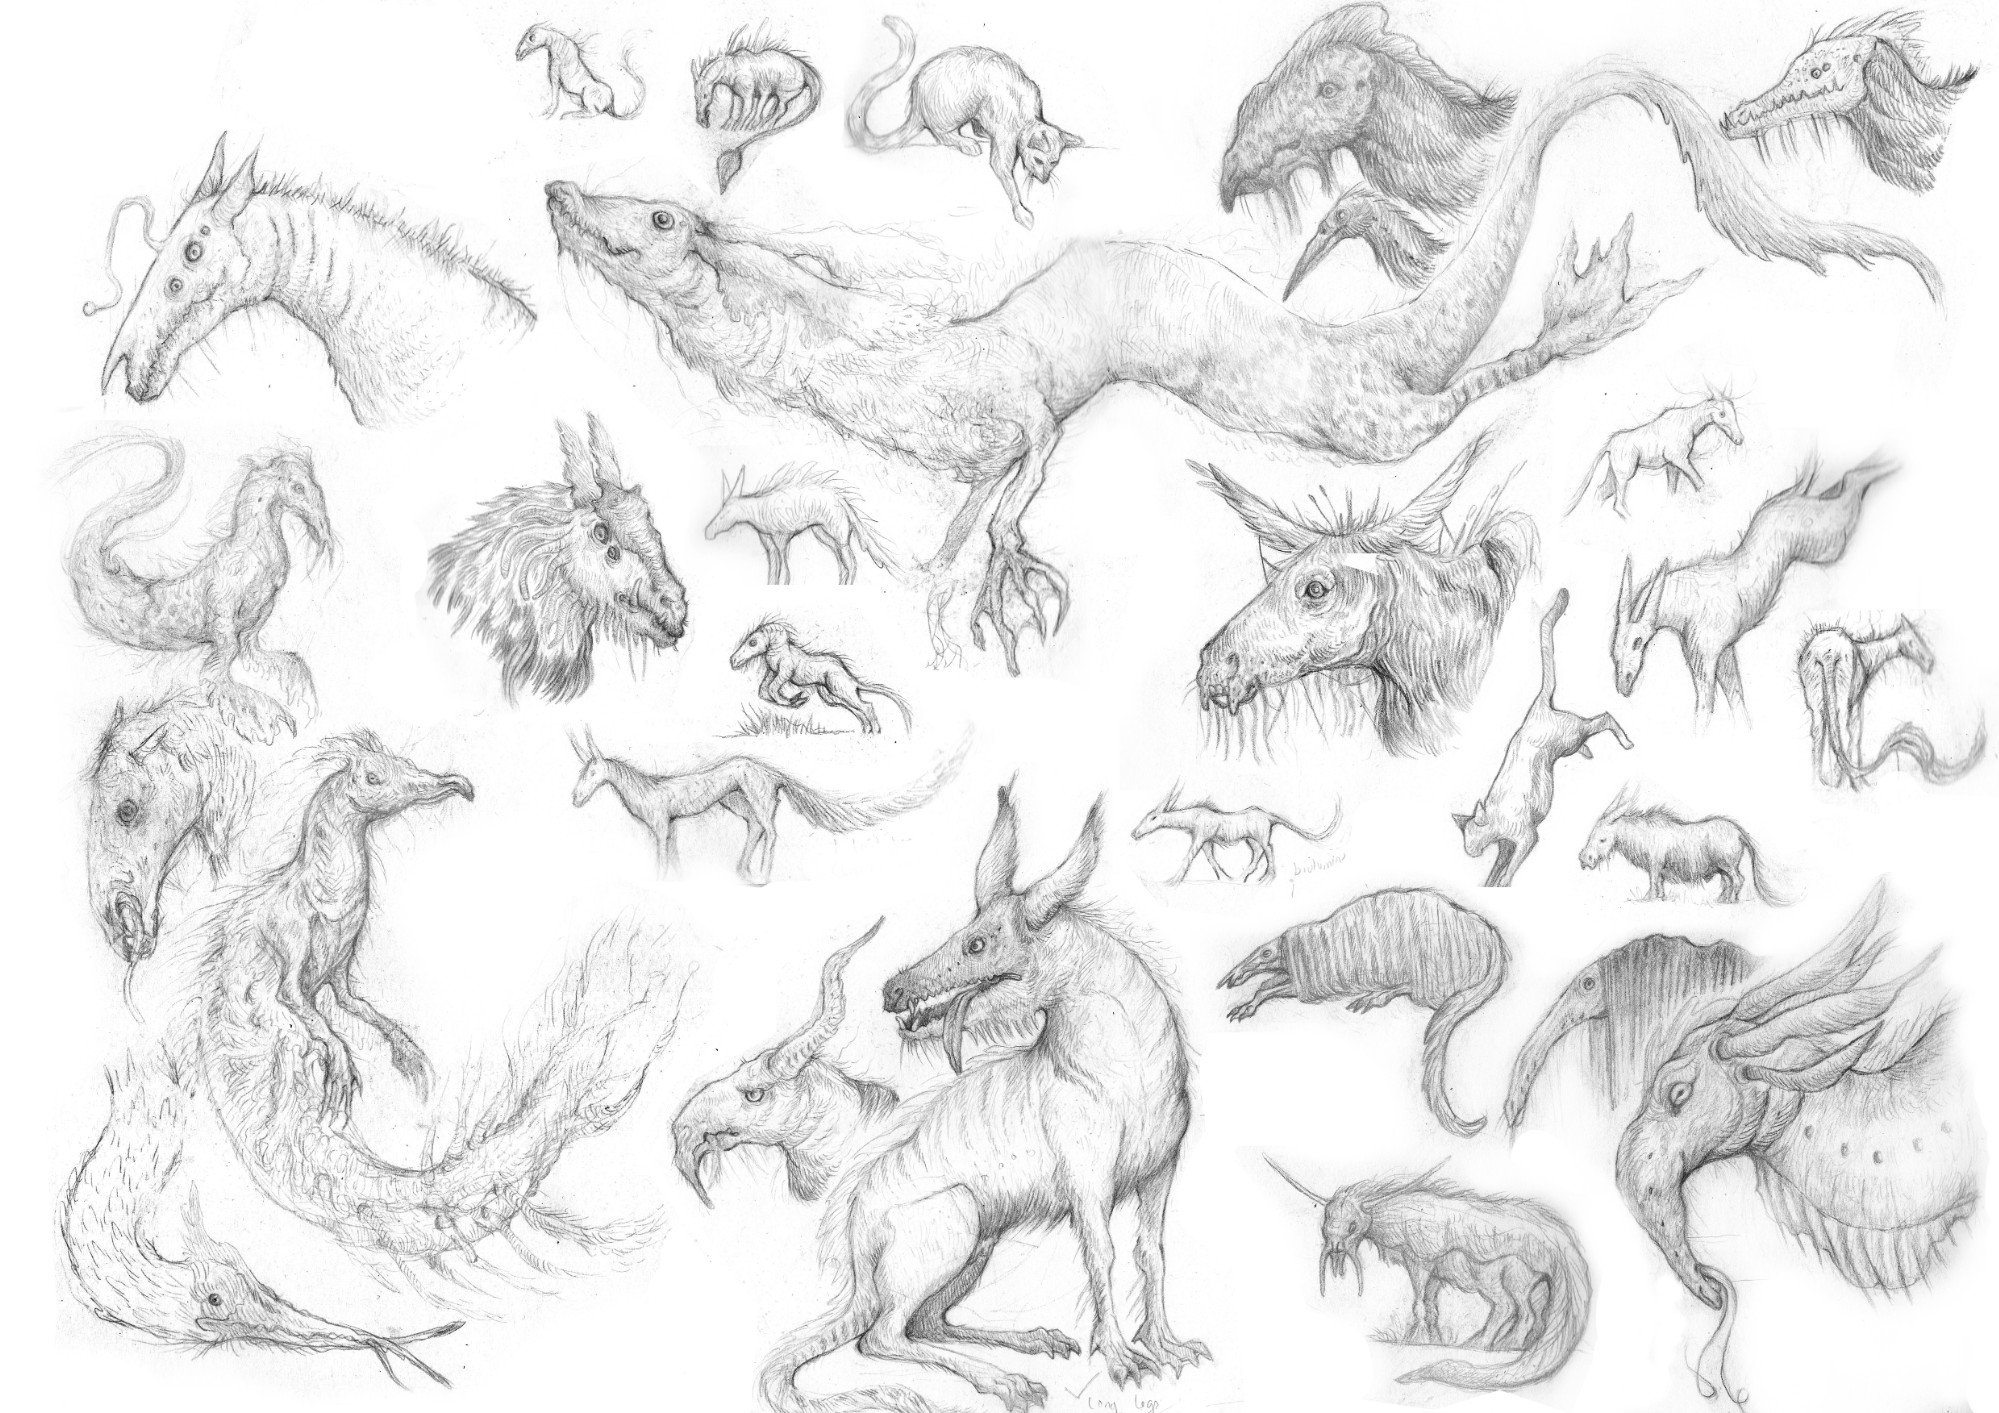 Early thumbnail concepts for a bestiary of fenland creatures. Graphite pencil.